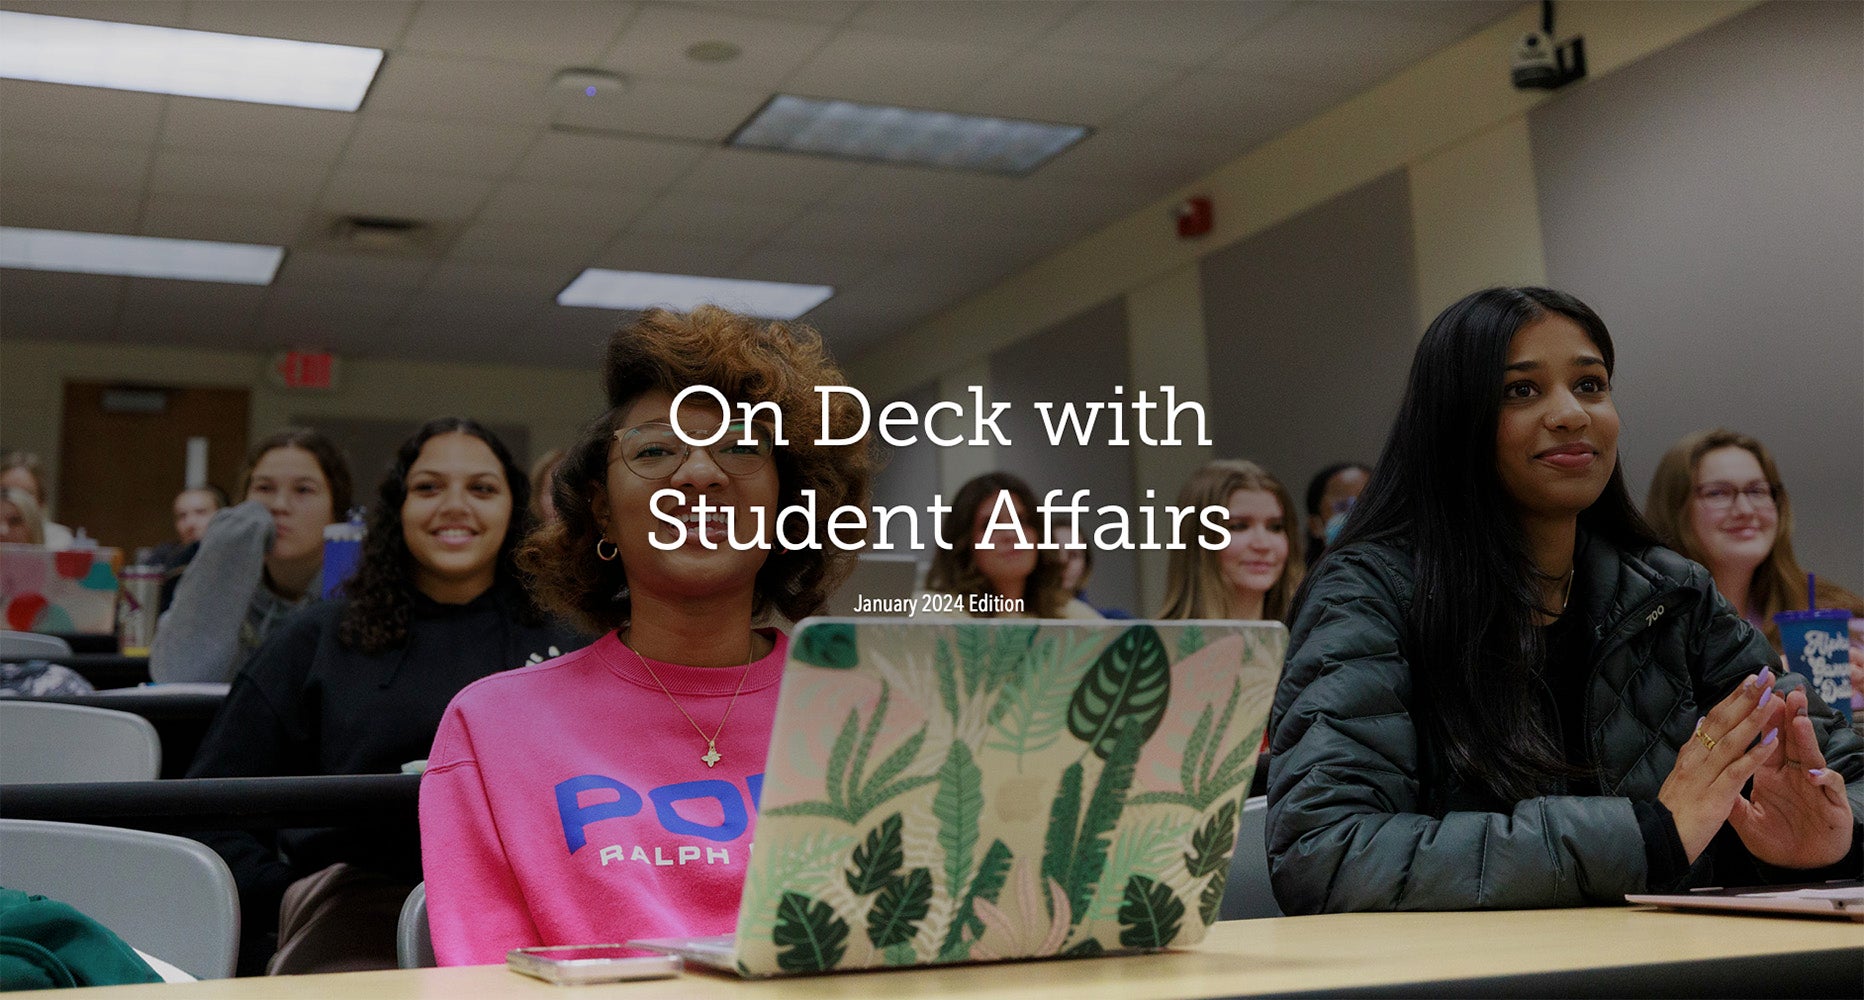 On Deck with Student Affairs January 2024